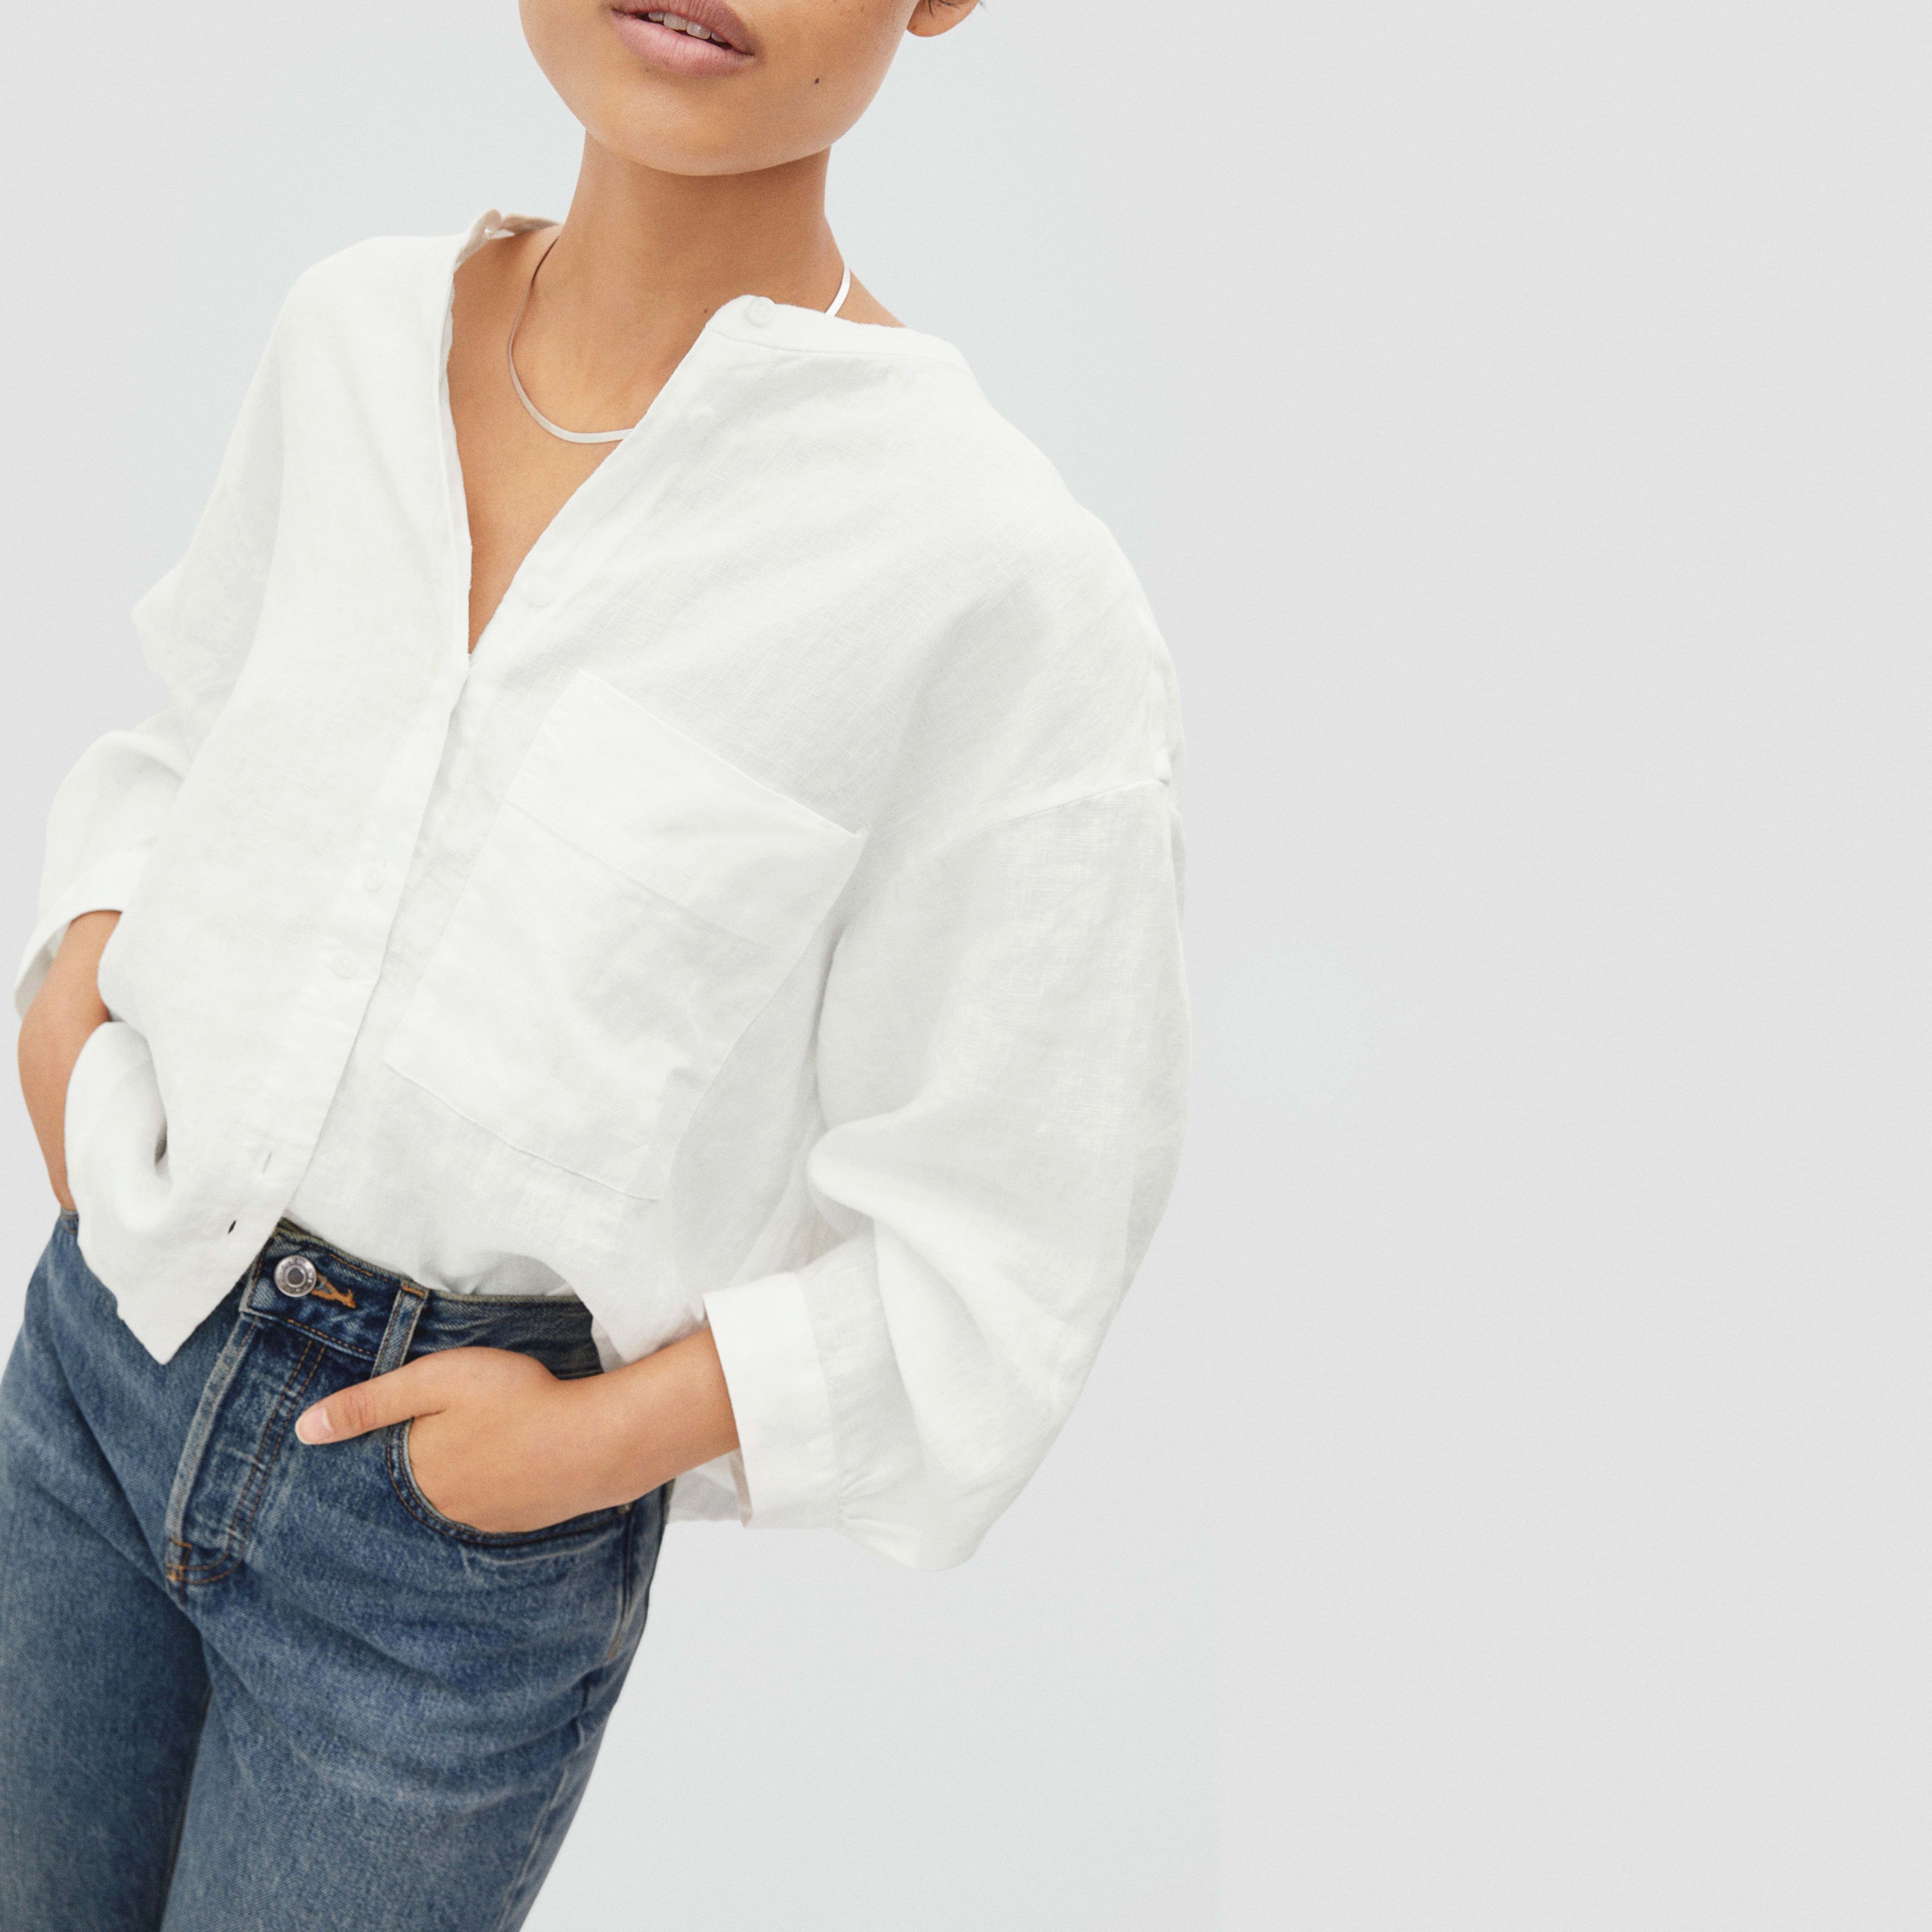 Linen Billow Blouse by Everlane in White, Size M | Everlane